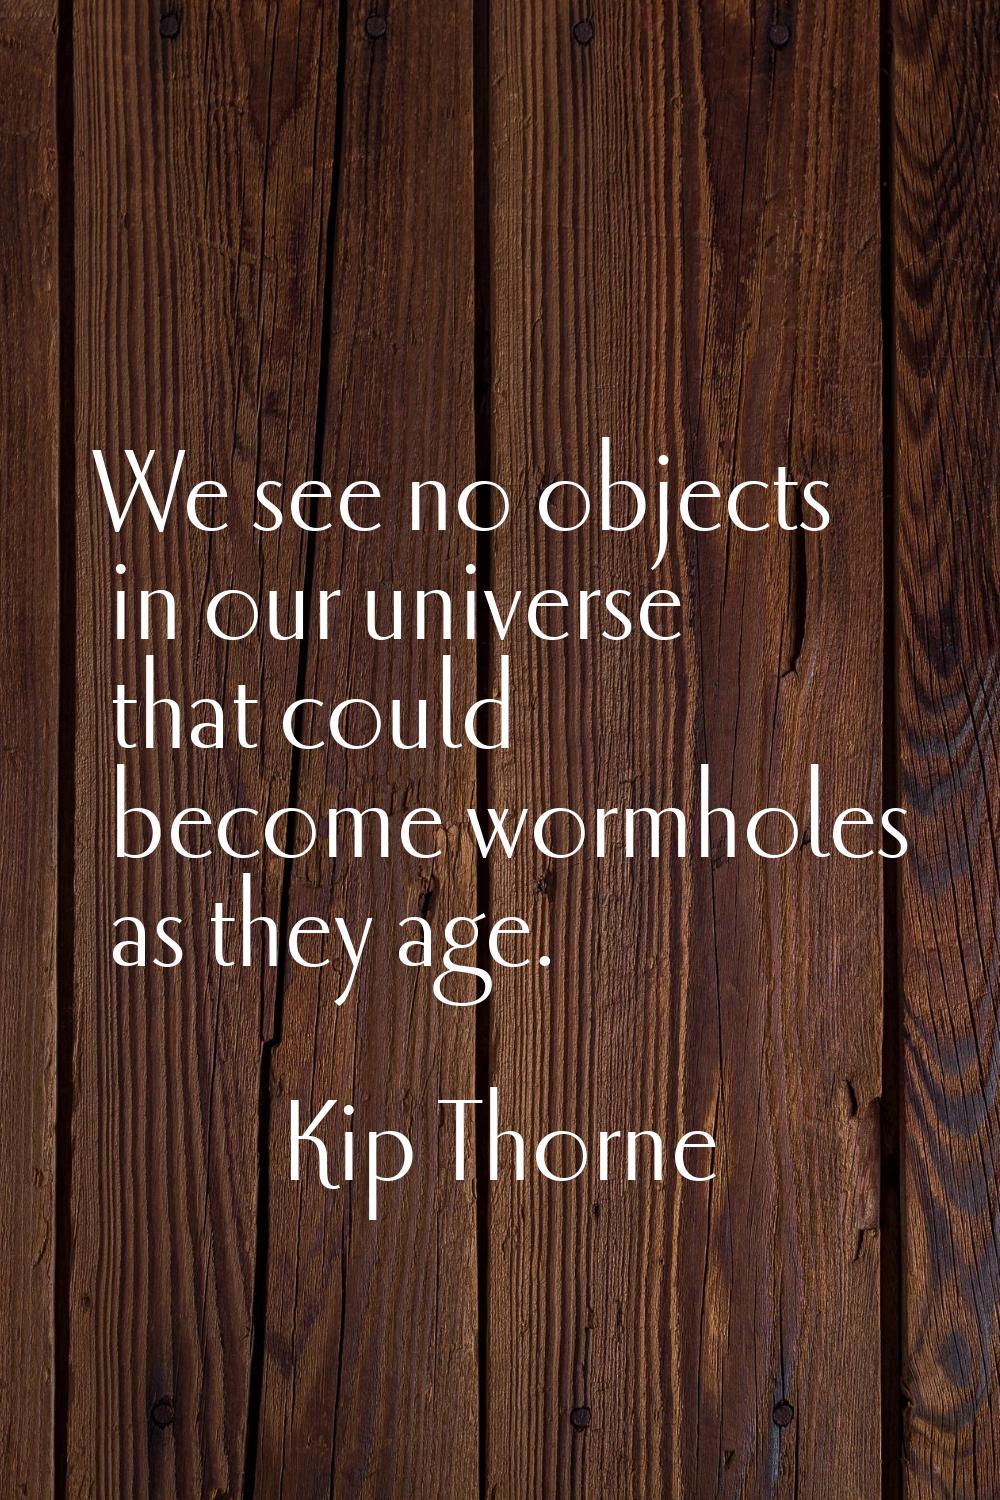 We see no objects in our universe that could become wormholes as they age.